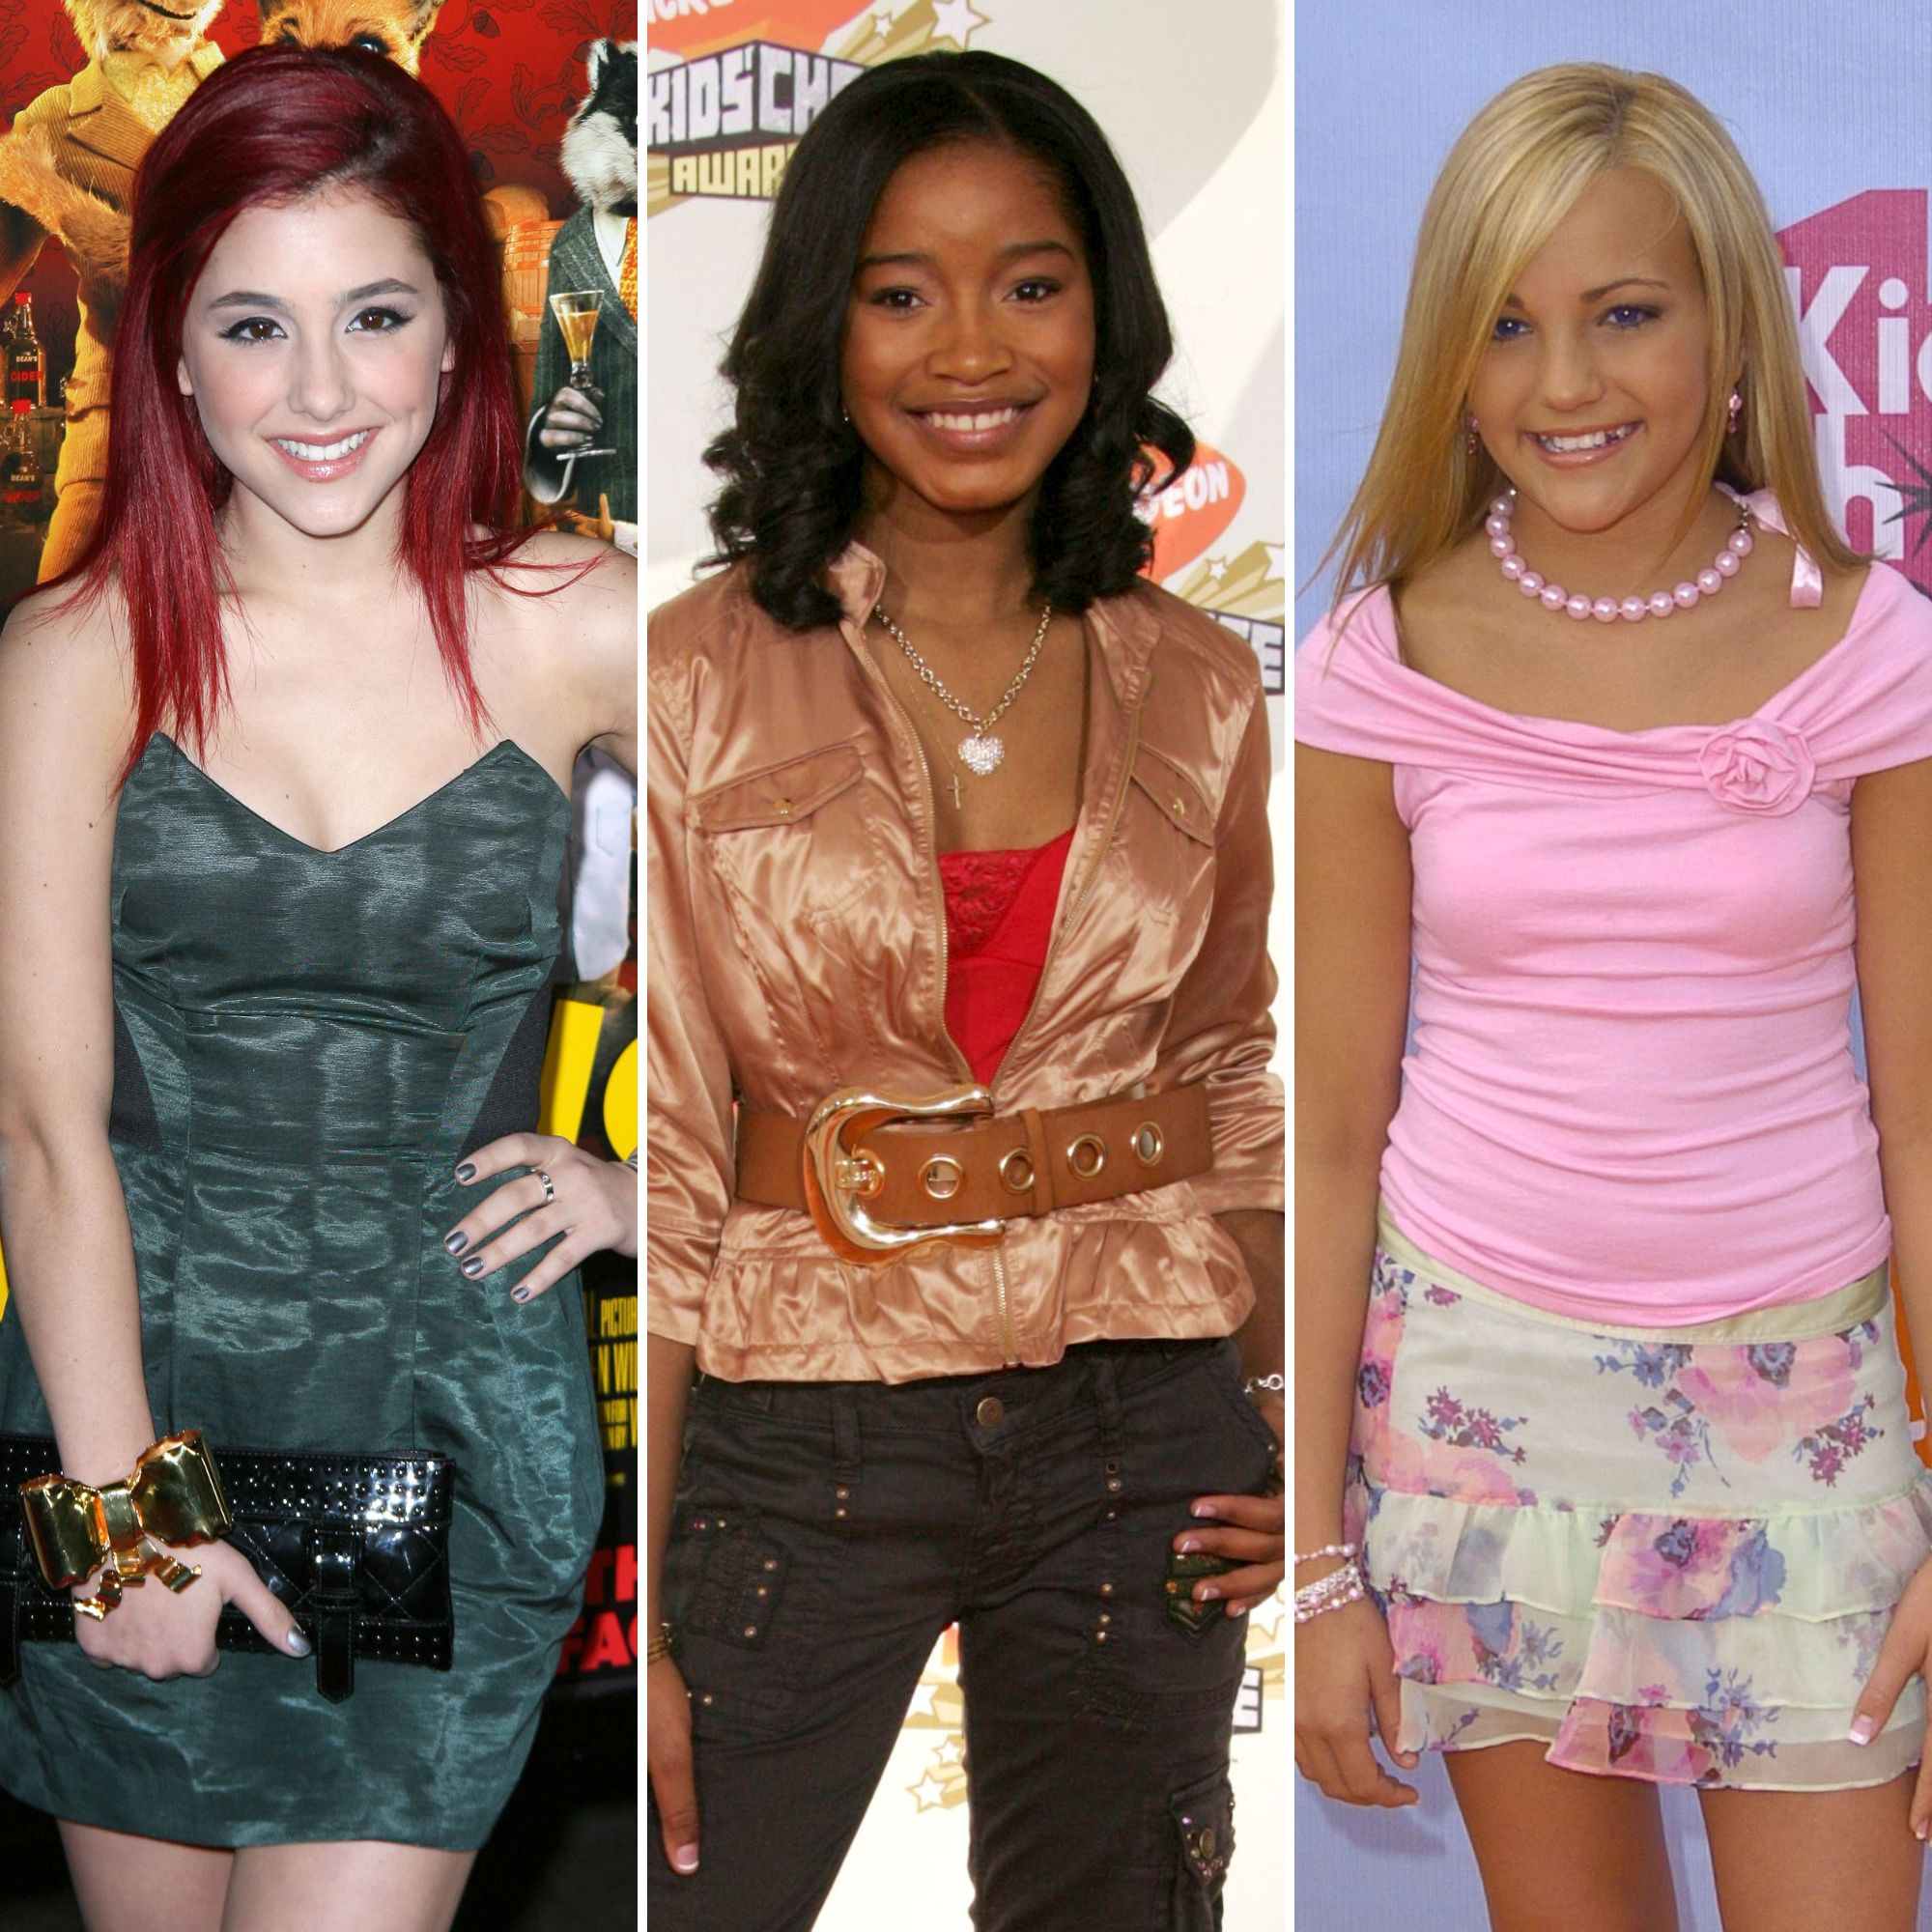 Ariana Grande Victoria Justice Dildo Porn - Nickelodeon Girls Who Look Different: Then-And-Now Pics